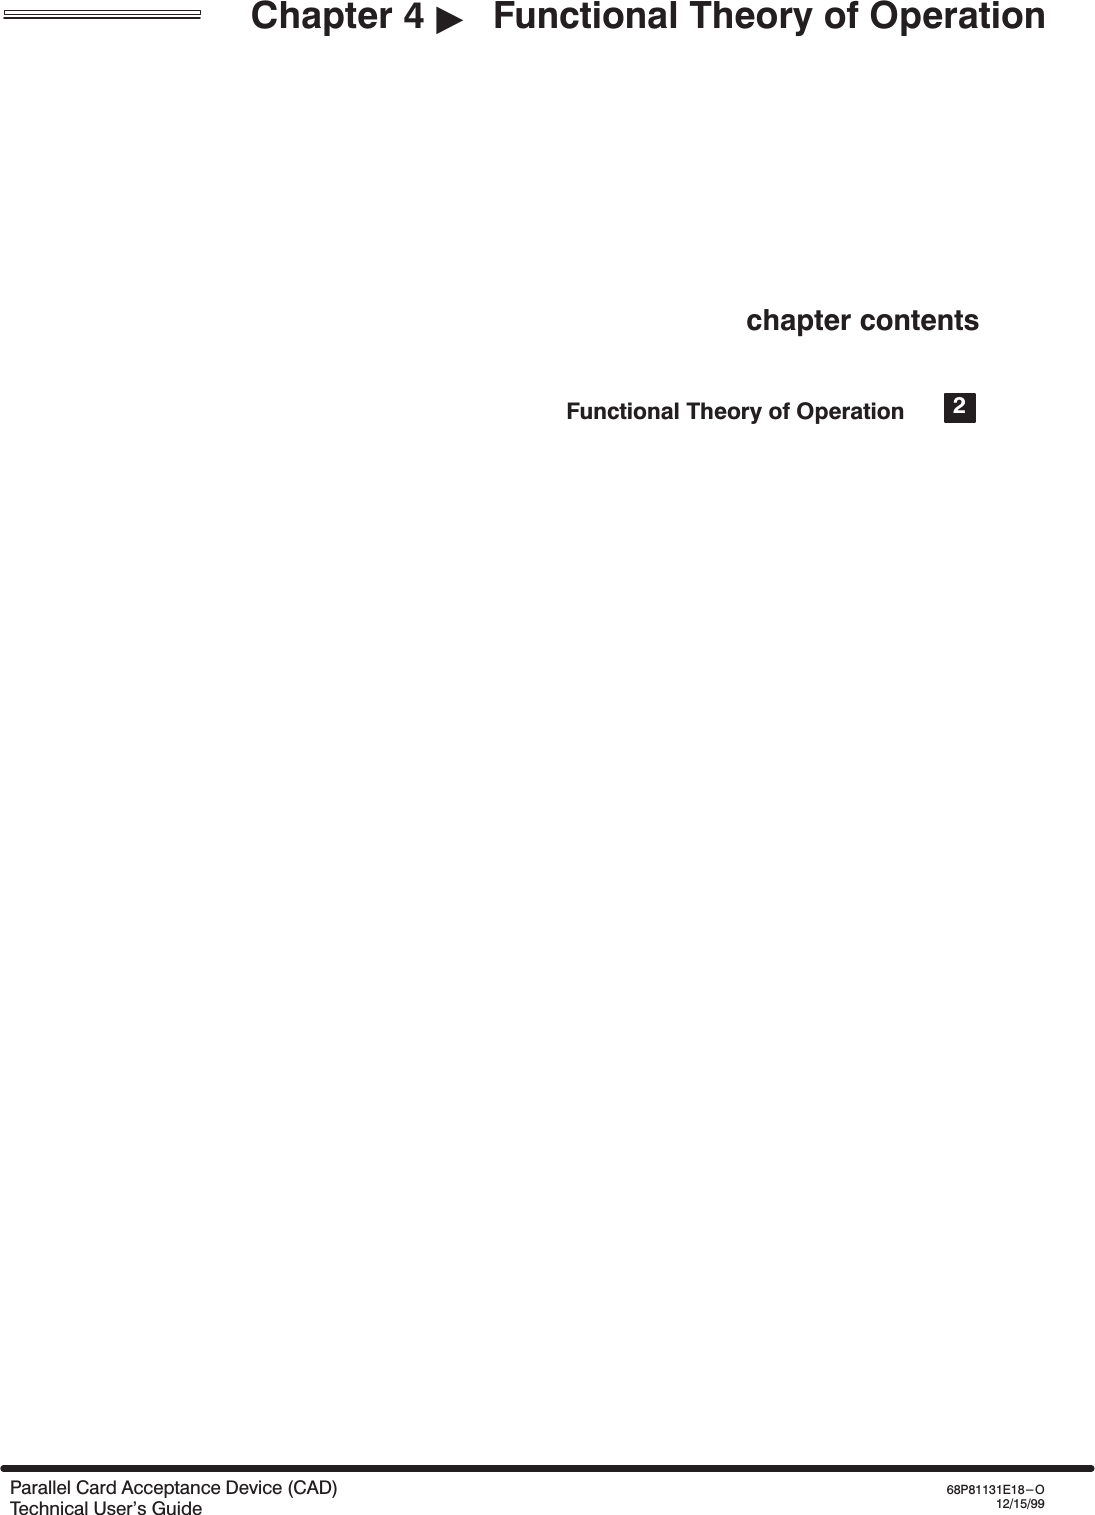 Chapter 4 &quot;Functional Theory of OperationParallel Card Acceptance Device (CAD)Technical User&apos;s Guide68P81131E18-O12/15/99chapter contentsFunctional Theory of Operation 2